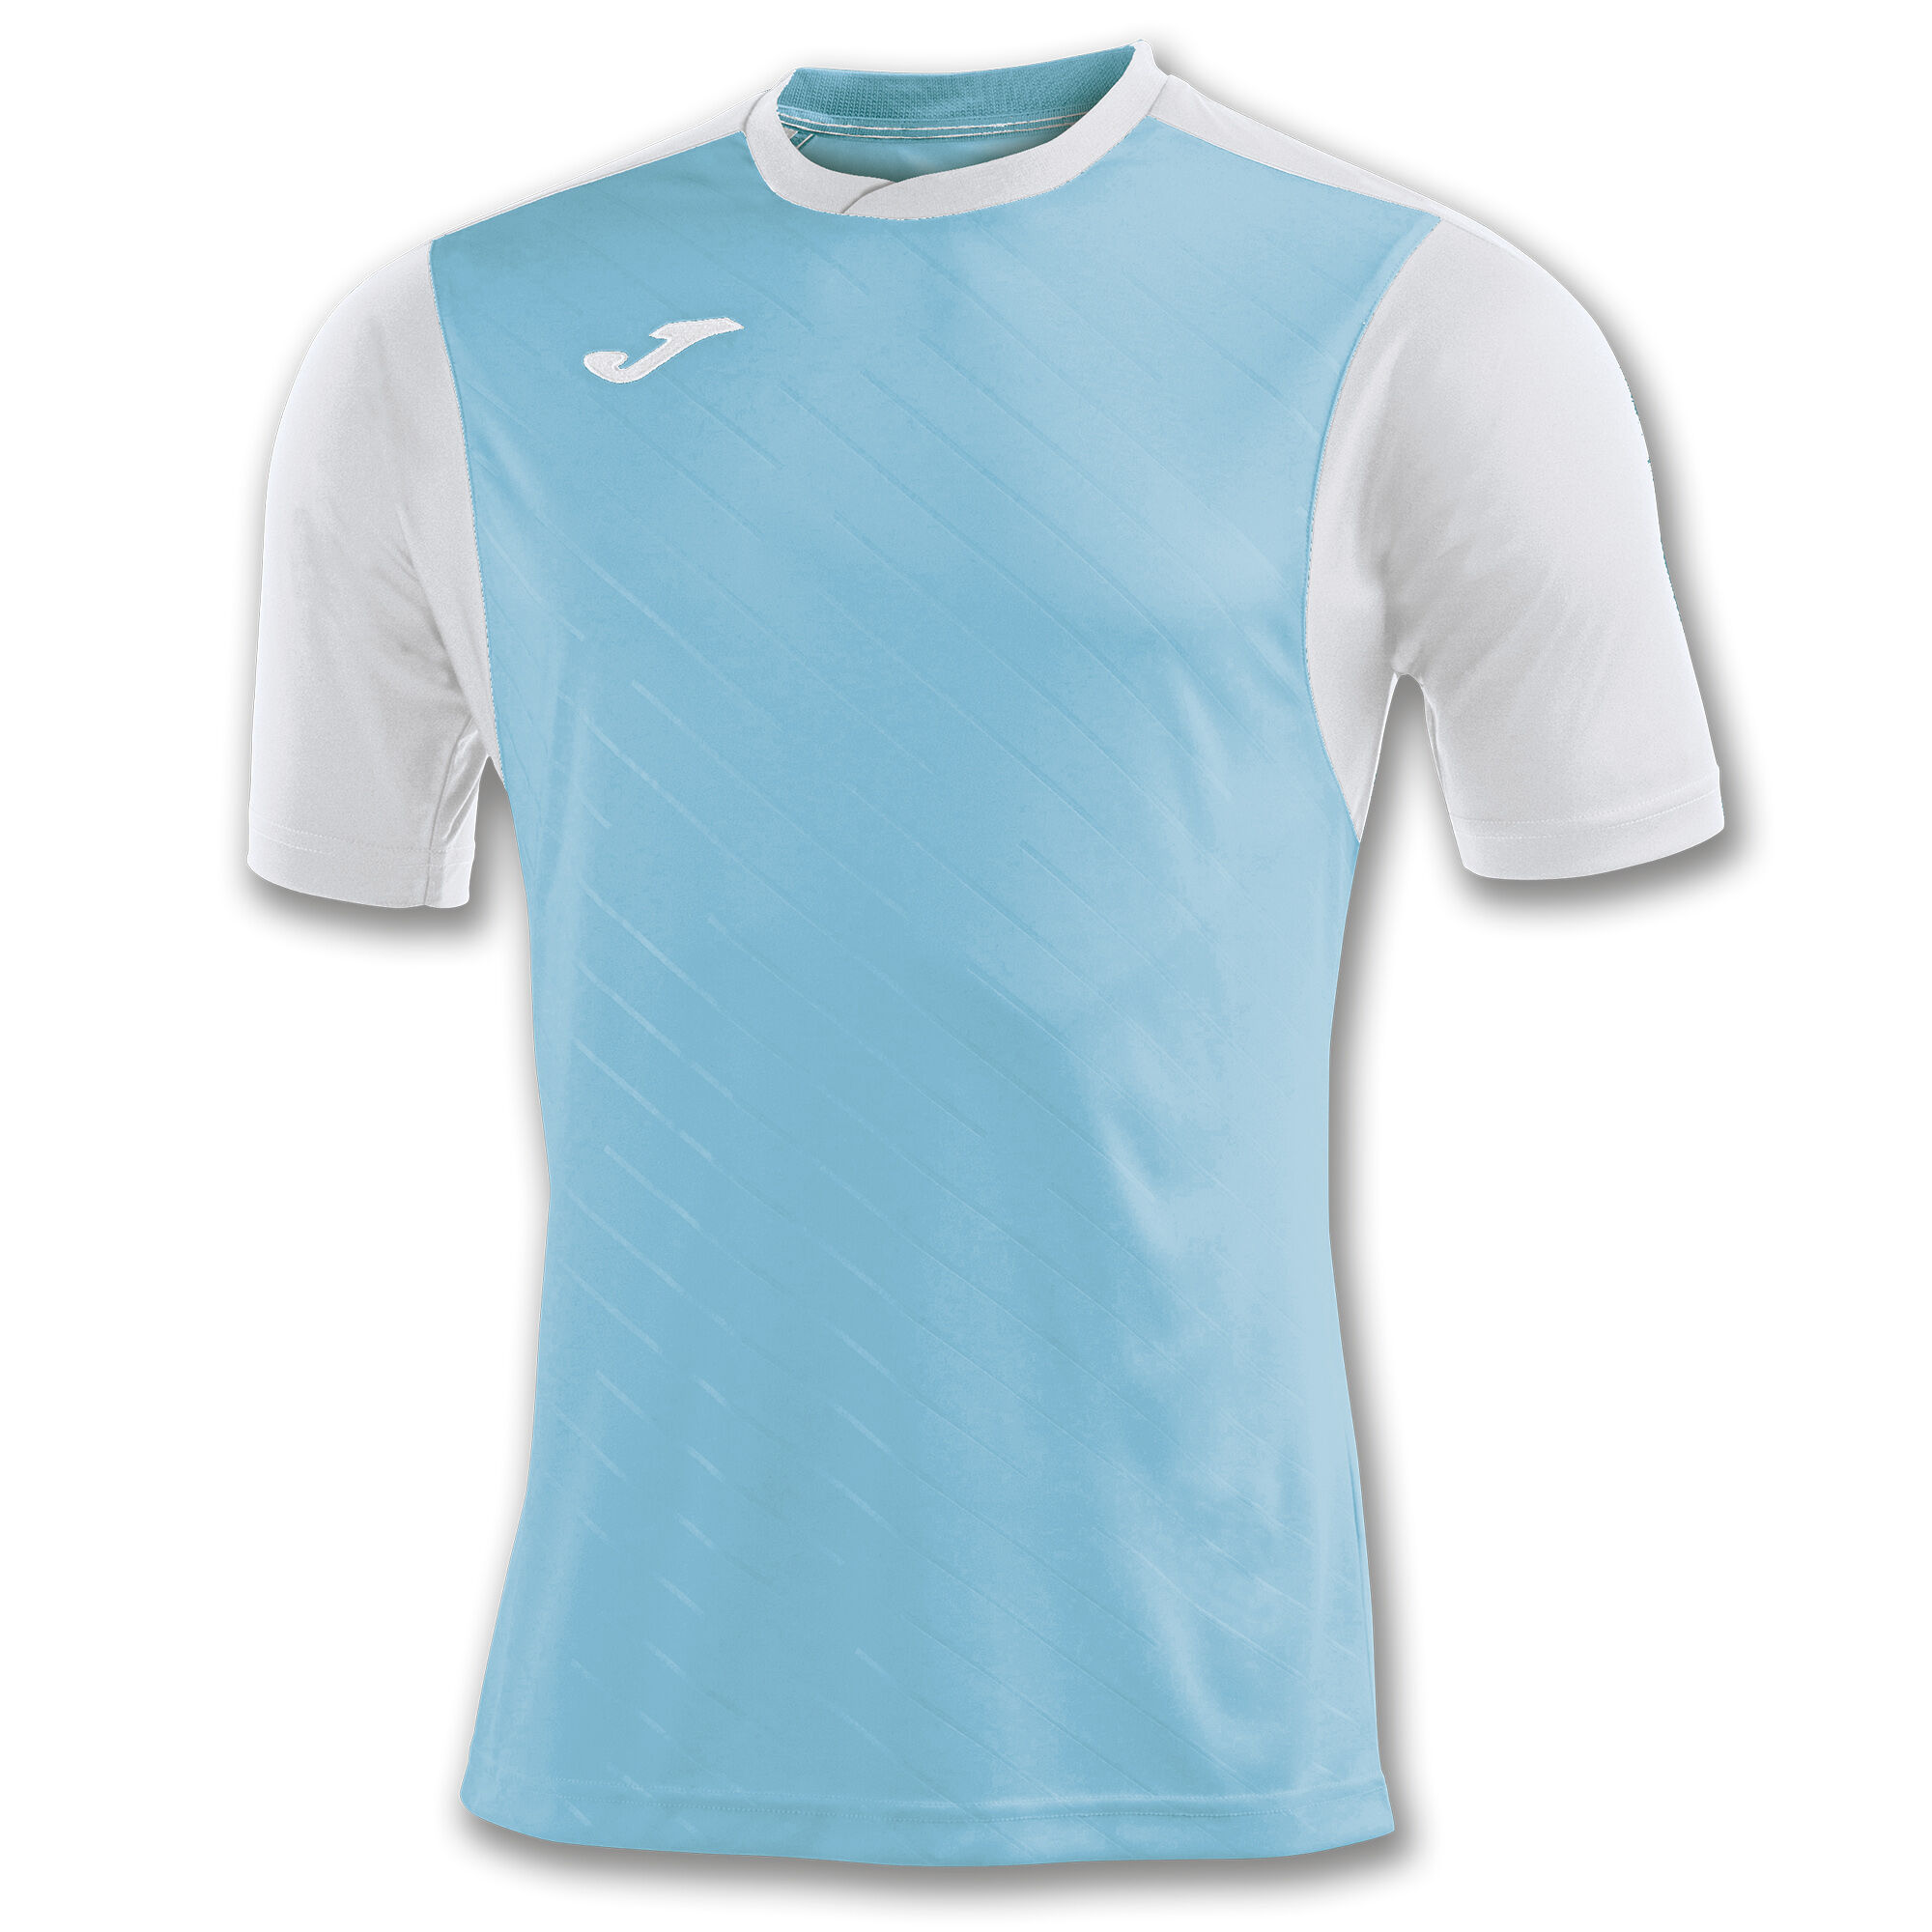 MAILLOT MANCHES COURTES HOMME TORNEO II TURQUOISE BLANC